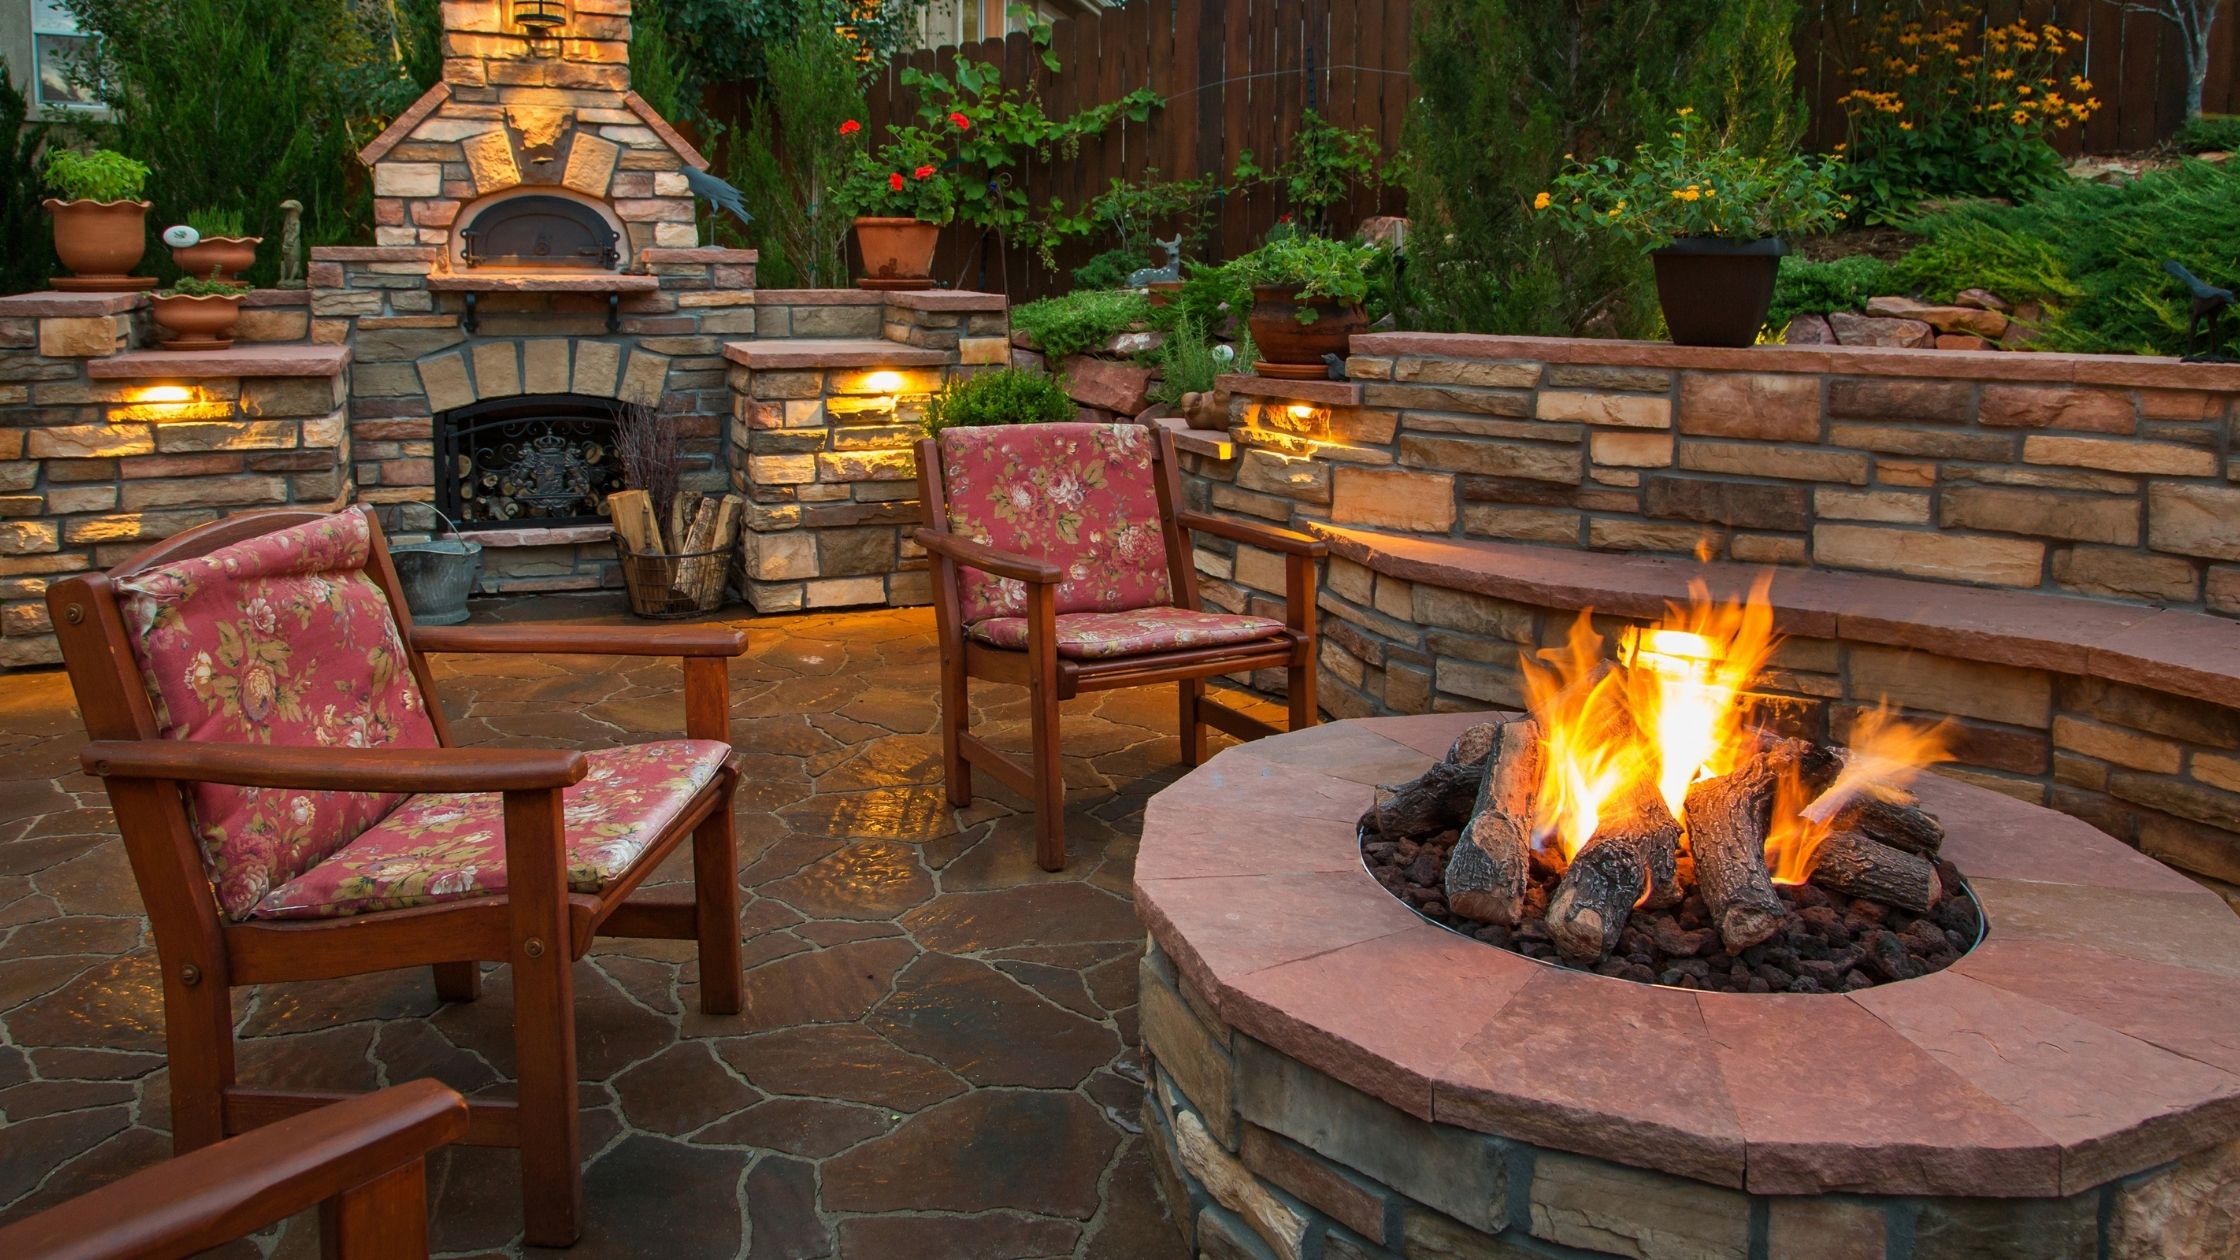 Build A Fire Pit Indianapolis In, Can I Have A Fire Pit In My Backyard